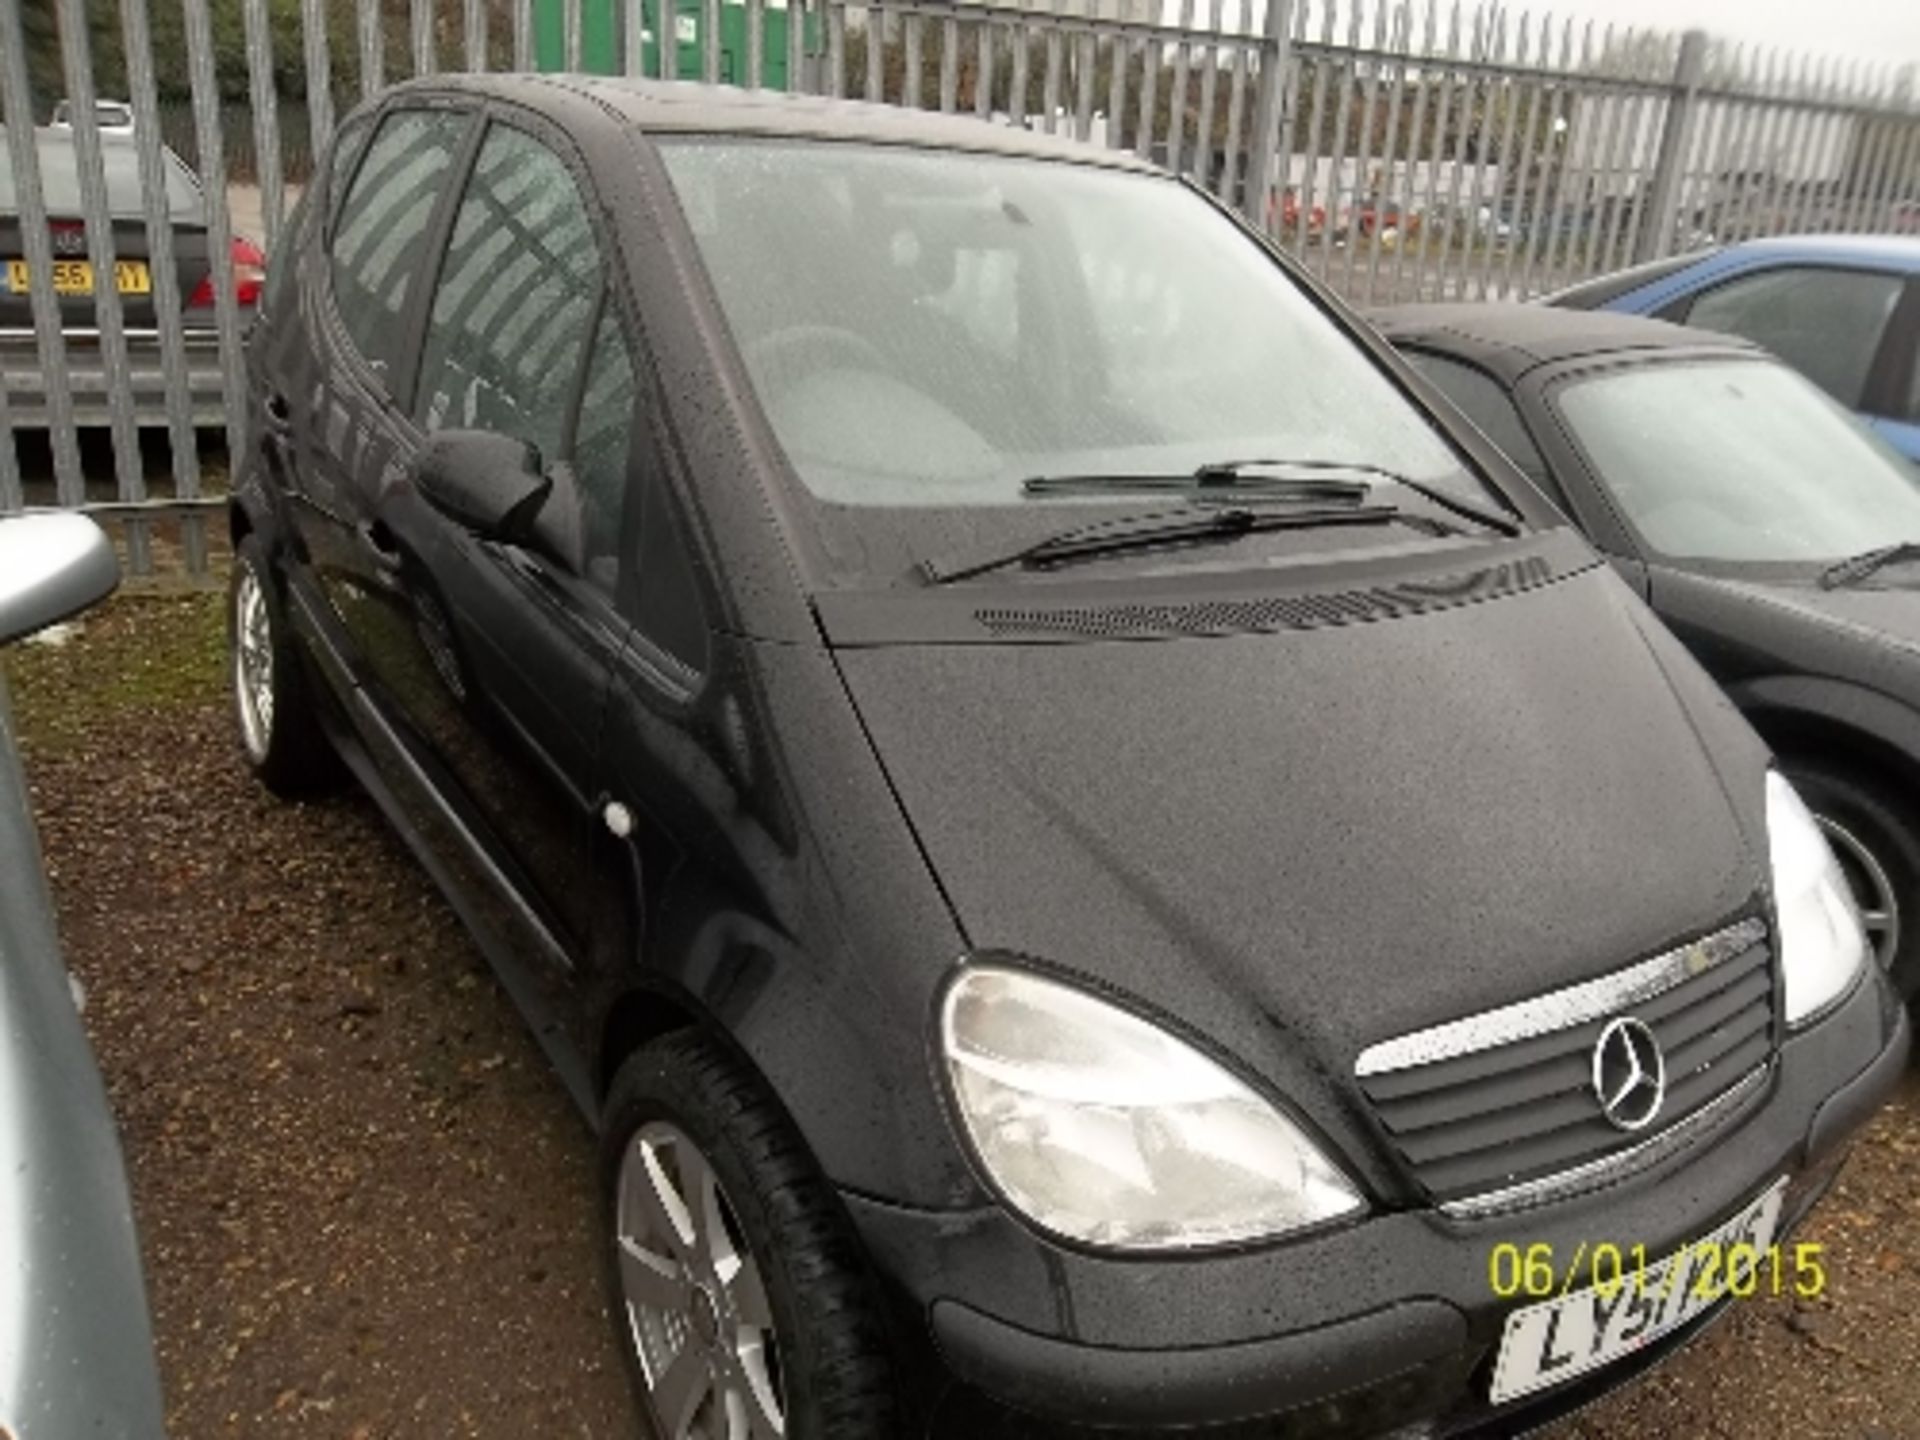 Mercedes A140 Classic - LY51 KWS Date of registration:  20.12.2001 1397cc, petrol, manual, black - Image 2 of 4